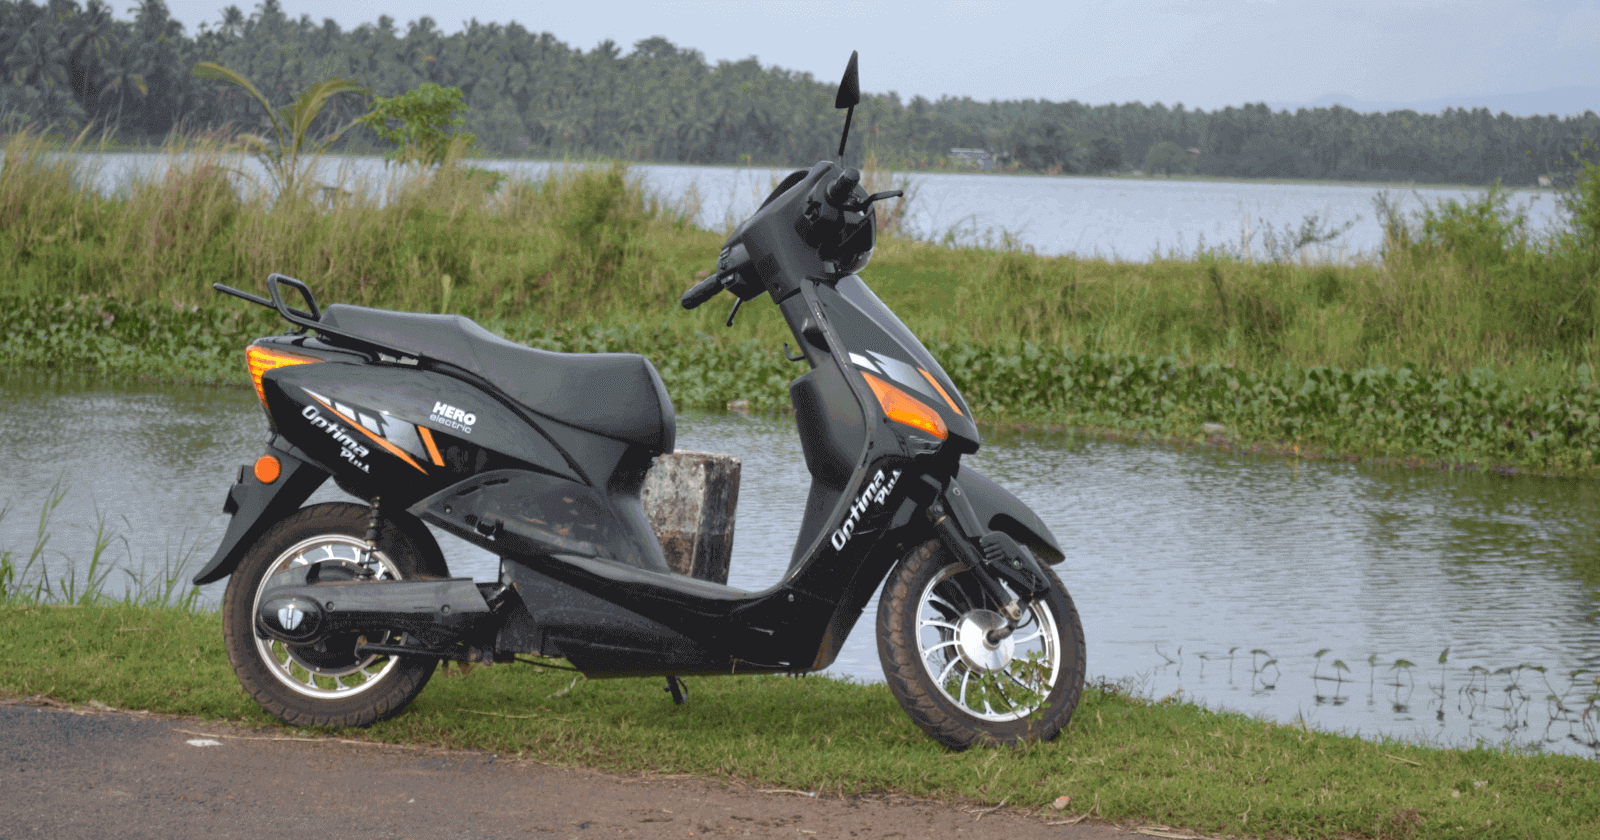 Upcoming Hero Electric Bikes in India: Expected Launch Date & Price